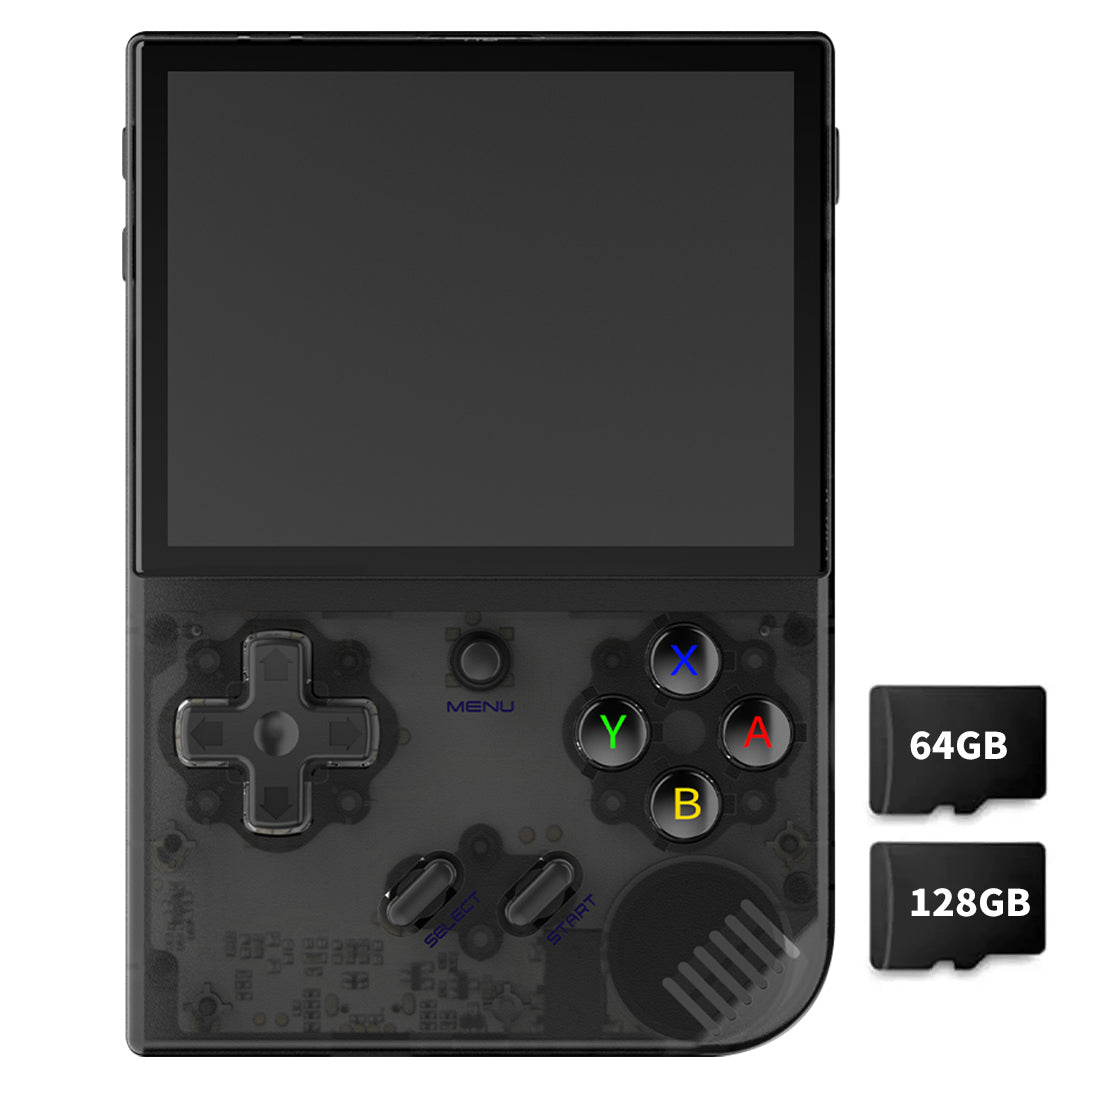 Anbernic RG35XX Plus: Pricing and full specifications for new retro gaming  handheld confirmed -  News